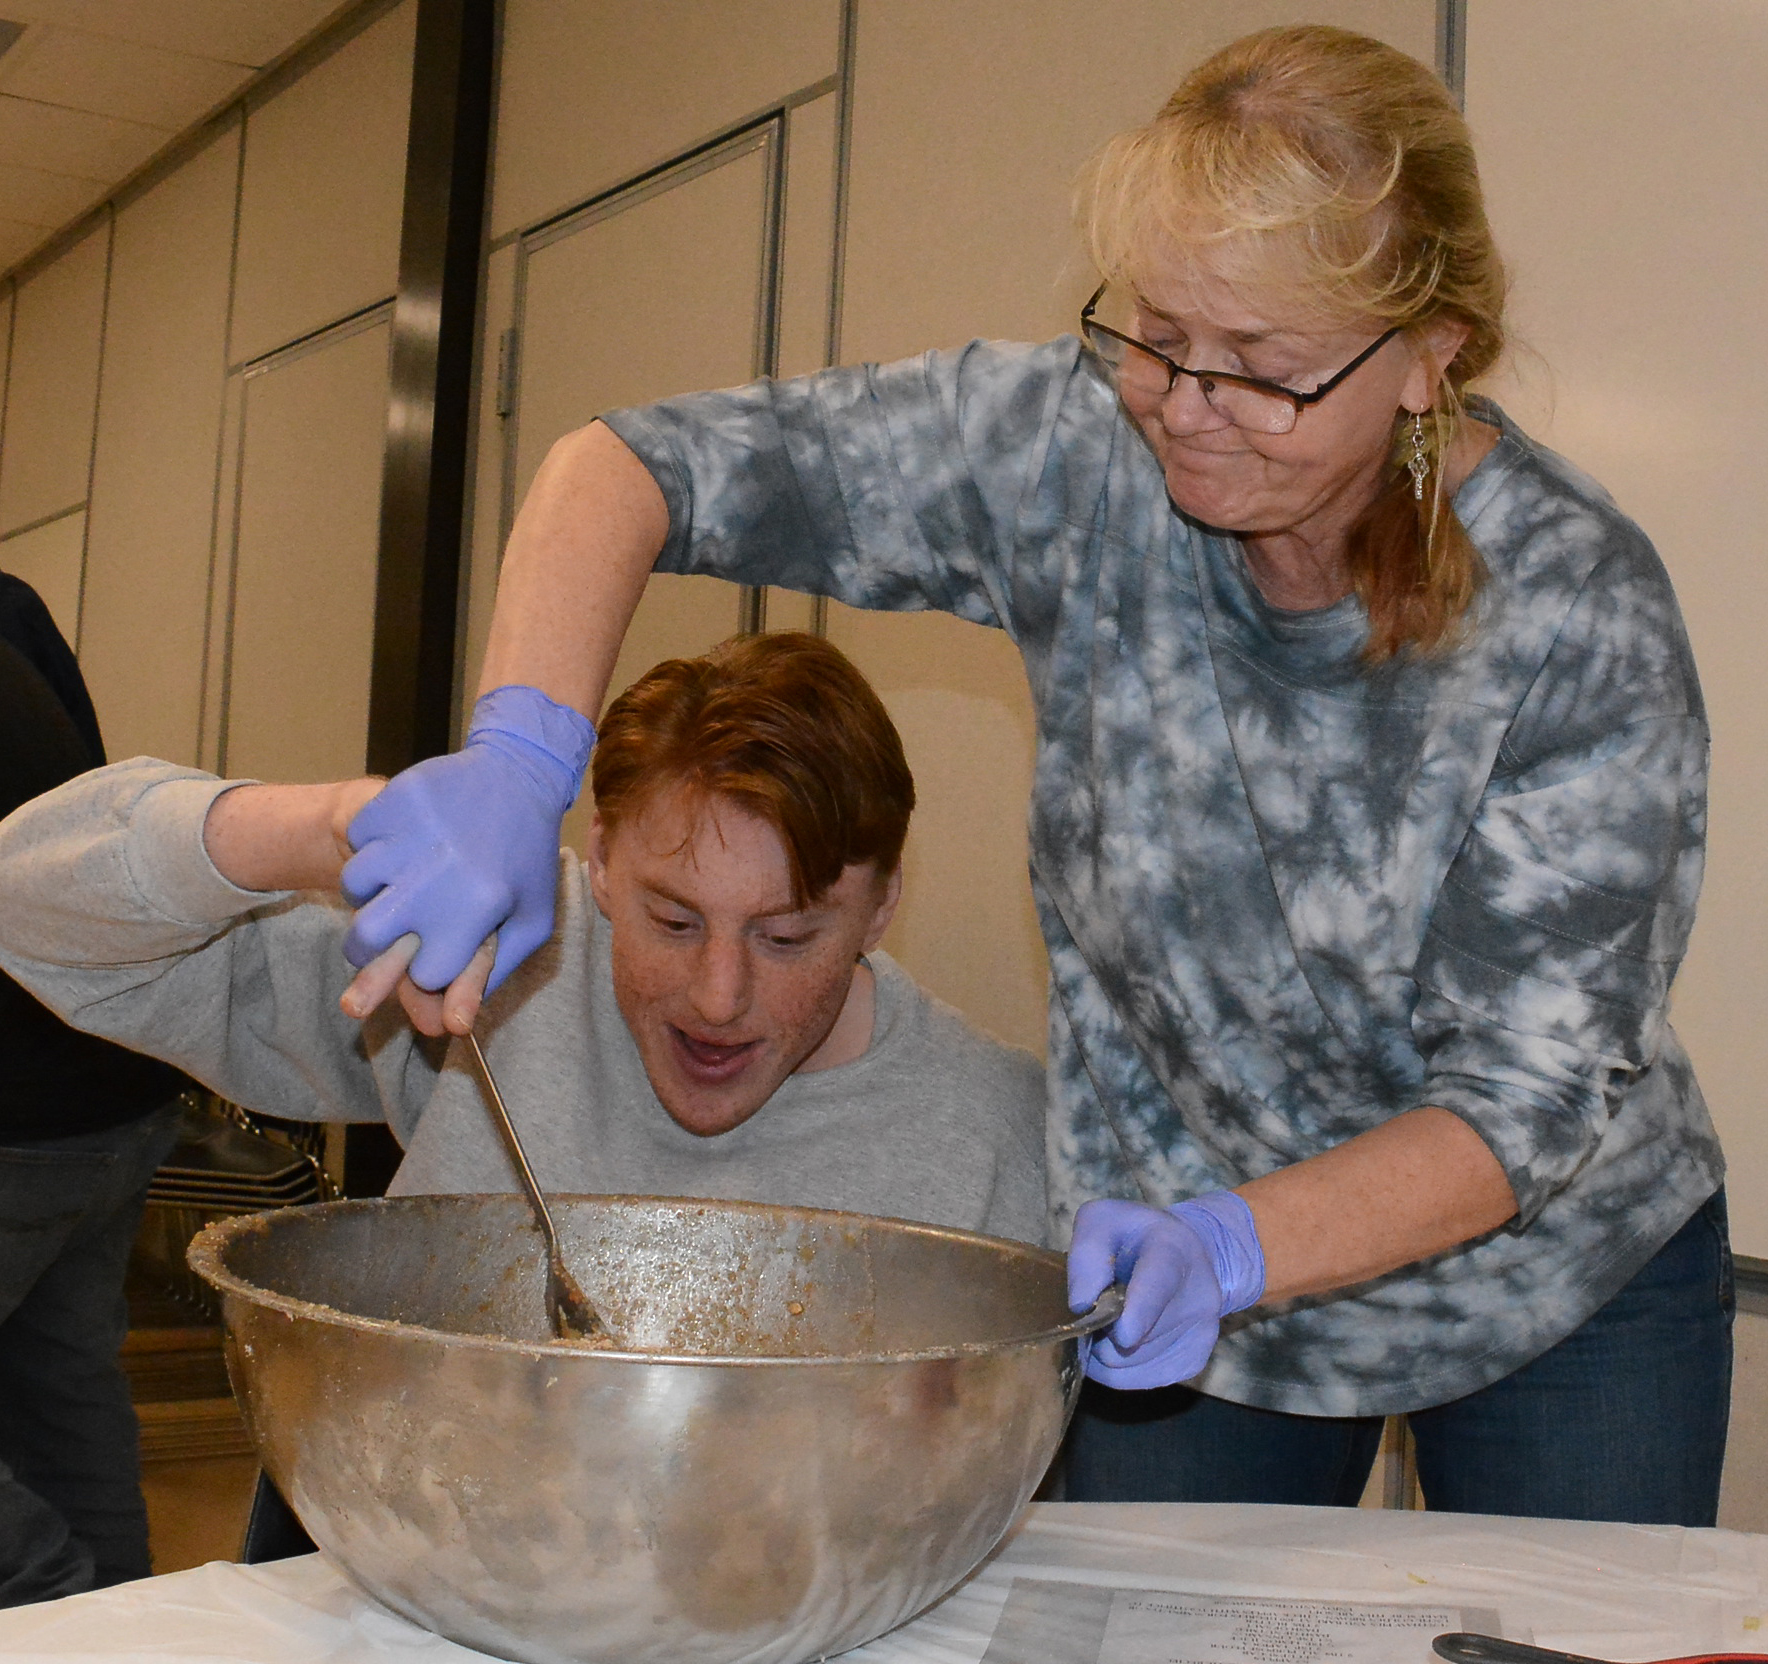 LOFT student Nathaniel Perry mixes up apple pie filling with some help from his mother, Andrea Perry. Photo by C.J. Carnacchio.